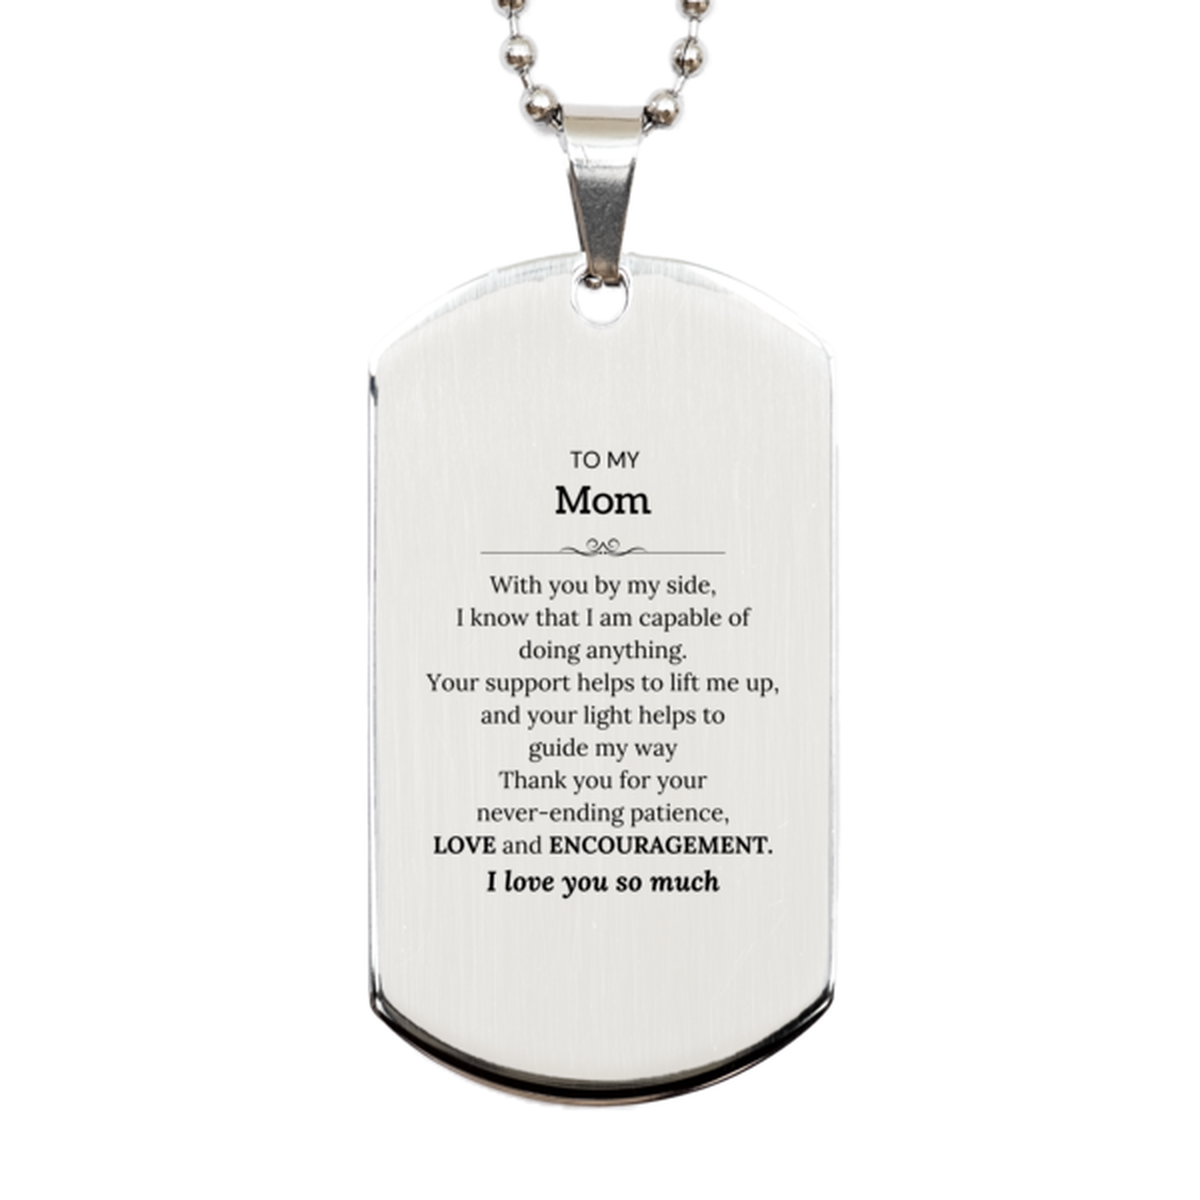 Appreciation Mom Silver Dog Tag Gifts, To My Mom Birthday Christmas Wedding Keepsake Gifts for Mom With you by my side, I know that I am capable of doing anything. I love you so much